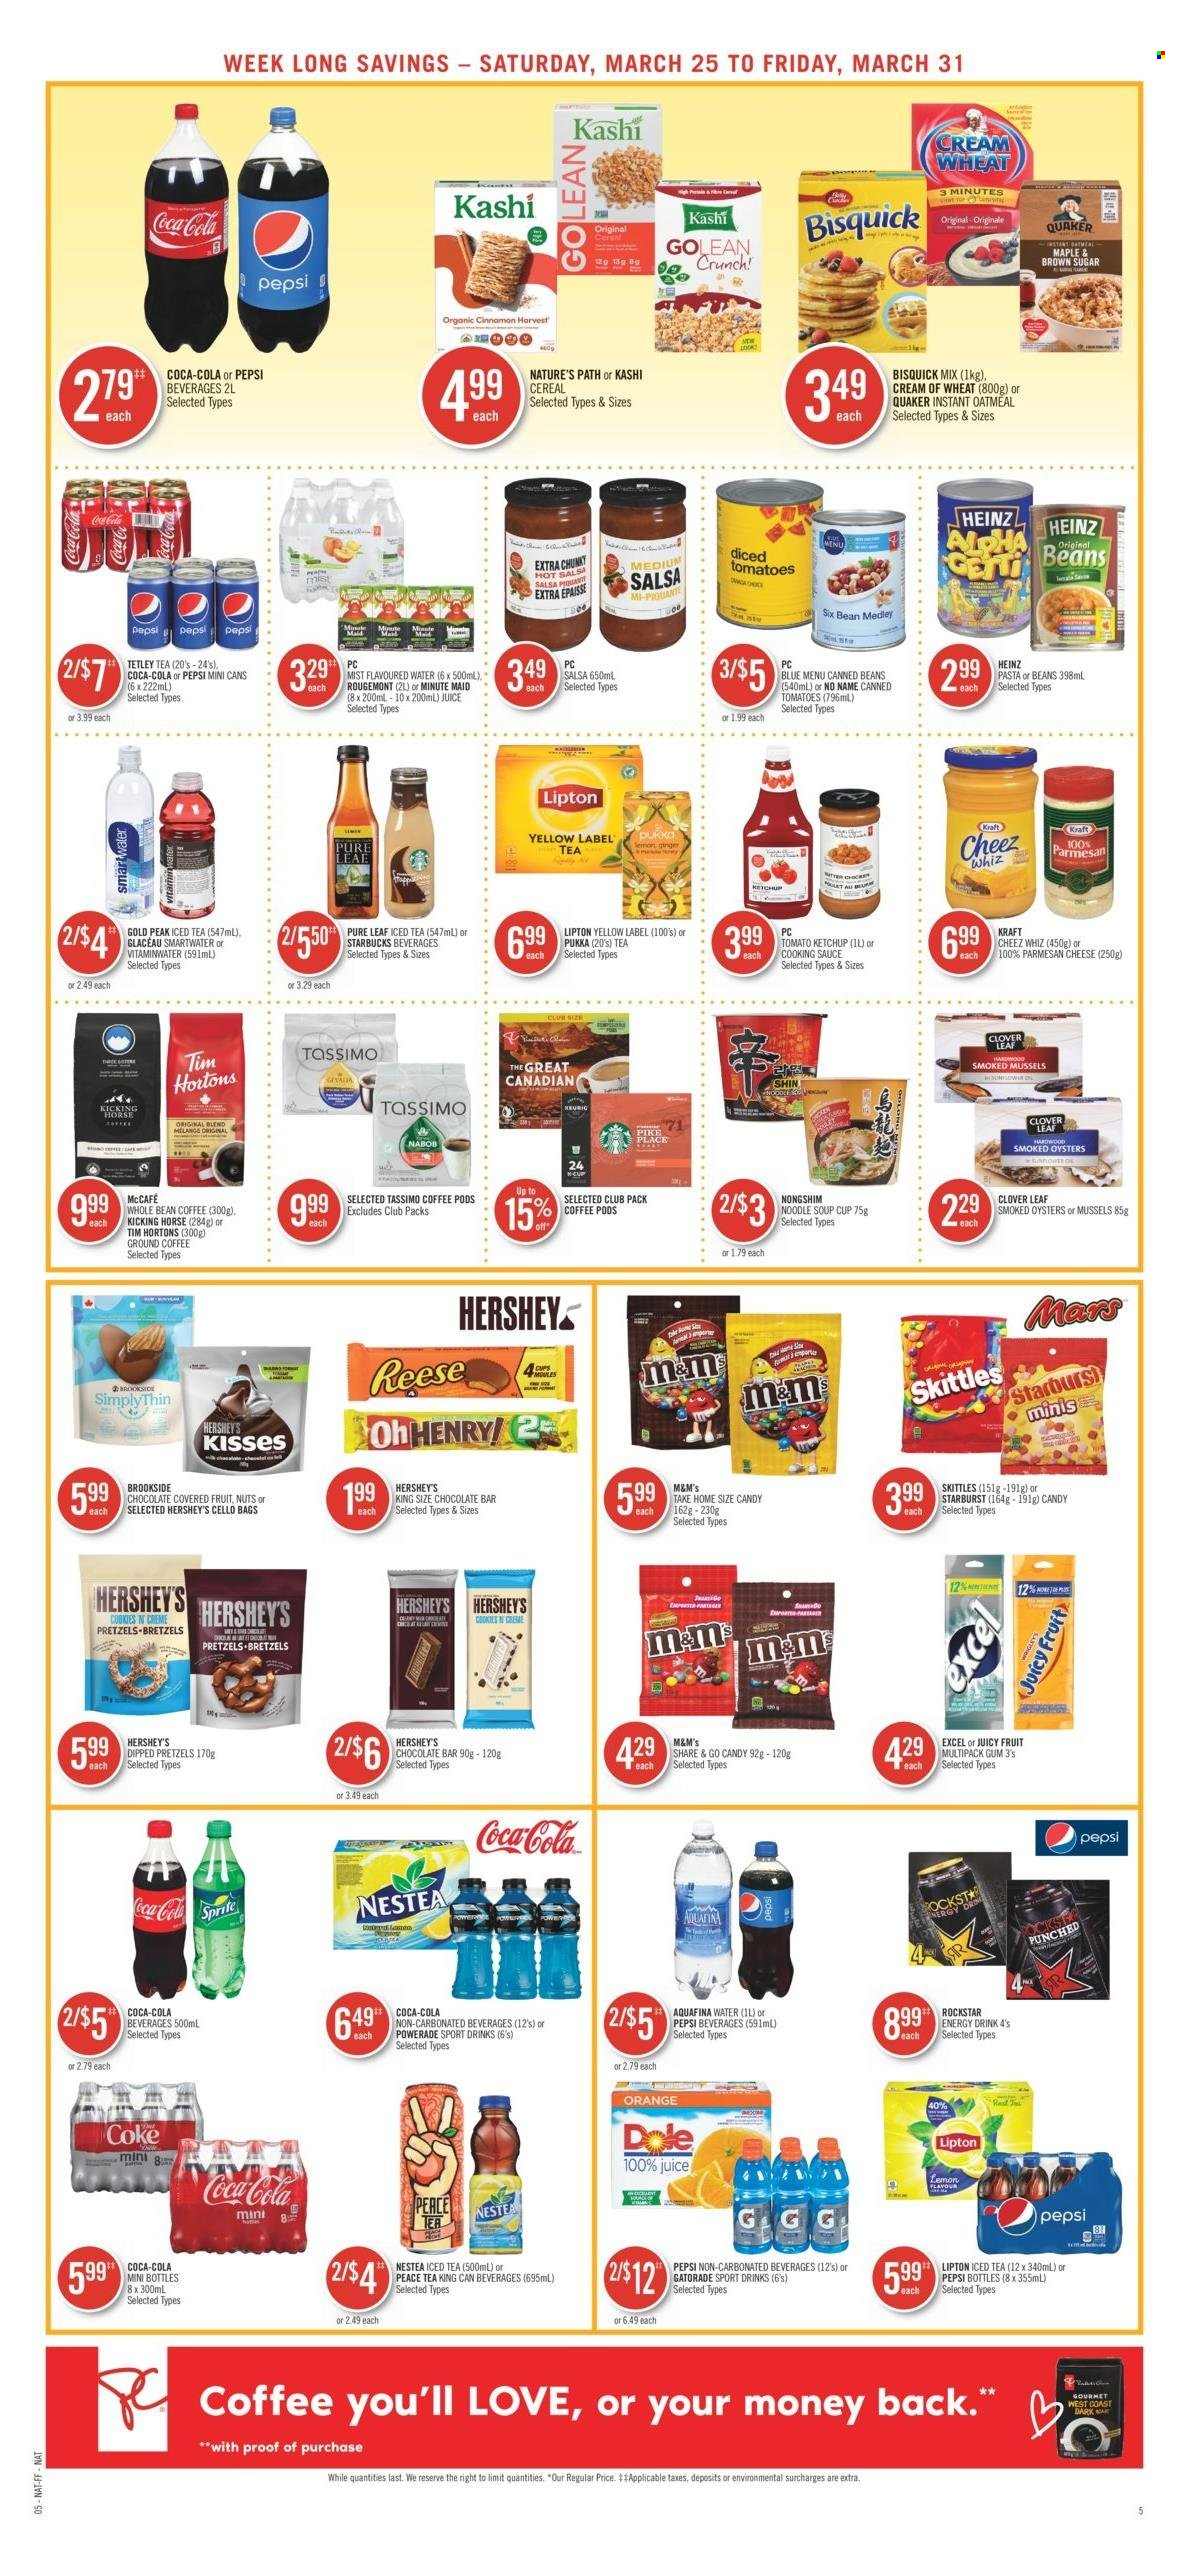 thumbnail - Shoppers Drug Mart Flyer - March 25, 2023 - March 31, 2023 - Sales products - pretzels, pie, mussels, smoked oysters, oysters, No Name, soup, sauce, noodles cup, Quaker, noodles, Kraft®, parmesan, cheese, Clover, Hershey's, cookies, Mars, Skittles, Starburst, chocolate bar, Bisquick, cane sugar, oatmeal, Dole, diced tomatoes, cereals, Cream of Wheat, cinnamon, salsa, Coca-Cola, Sprite, Powerade, Pepsi, juice, ice tea, Rockstar, Gatorade, fruit punch, Coke, Aquafina, Smartwater, water, Pure Leaf, coffee, coffee pods, ground coffee, Starbucks, McCafe, cup, Heinz, ketchup, Lipton, M&M's. Page 7.